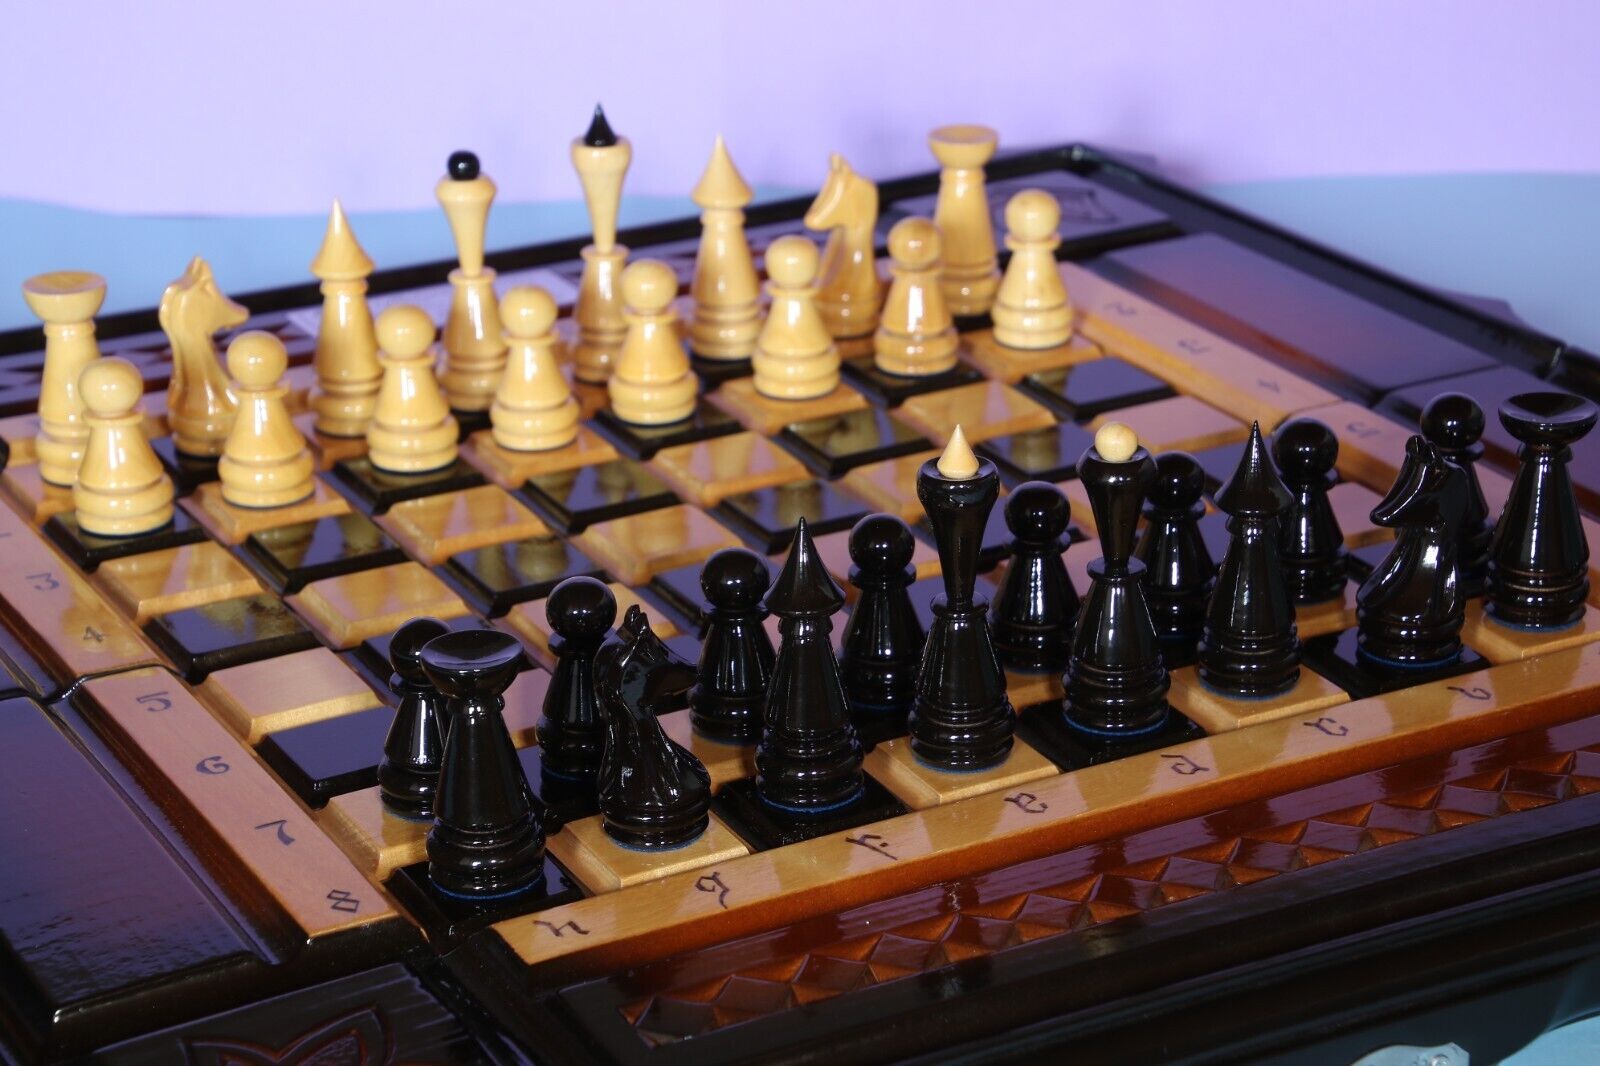 Exclusive unique Wooden Chess Set Hand Made in USSR St. Petersburg Kresty Prison